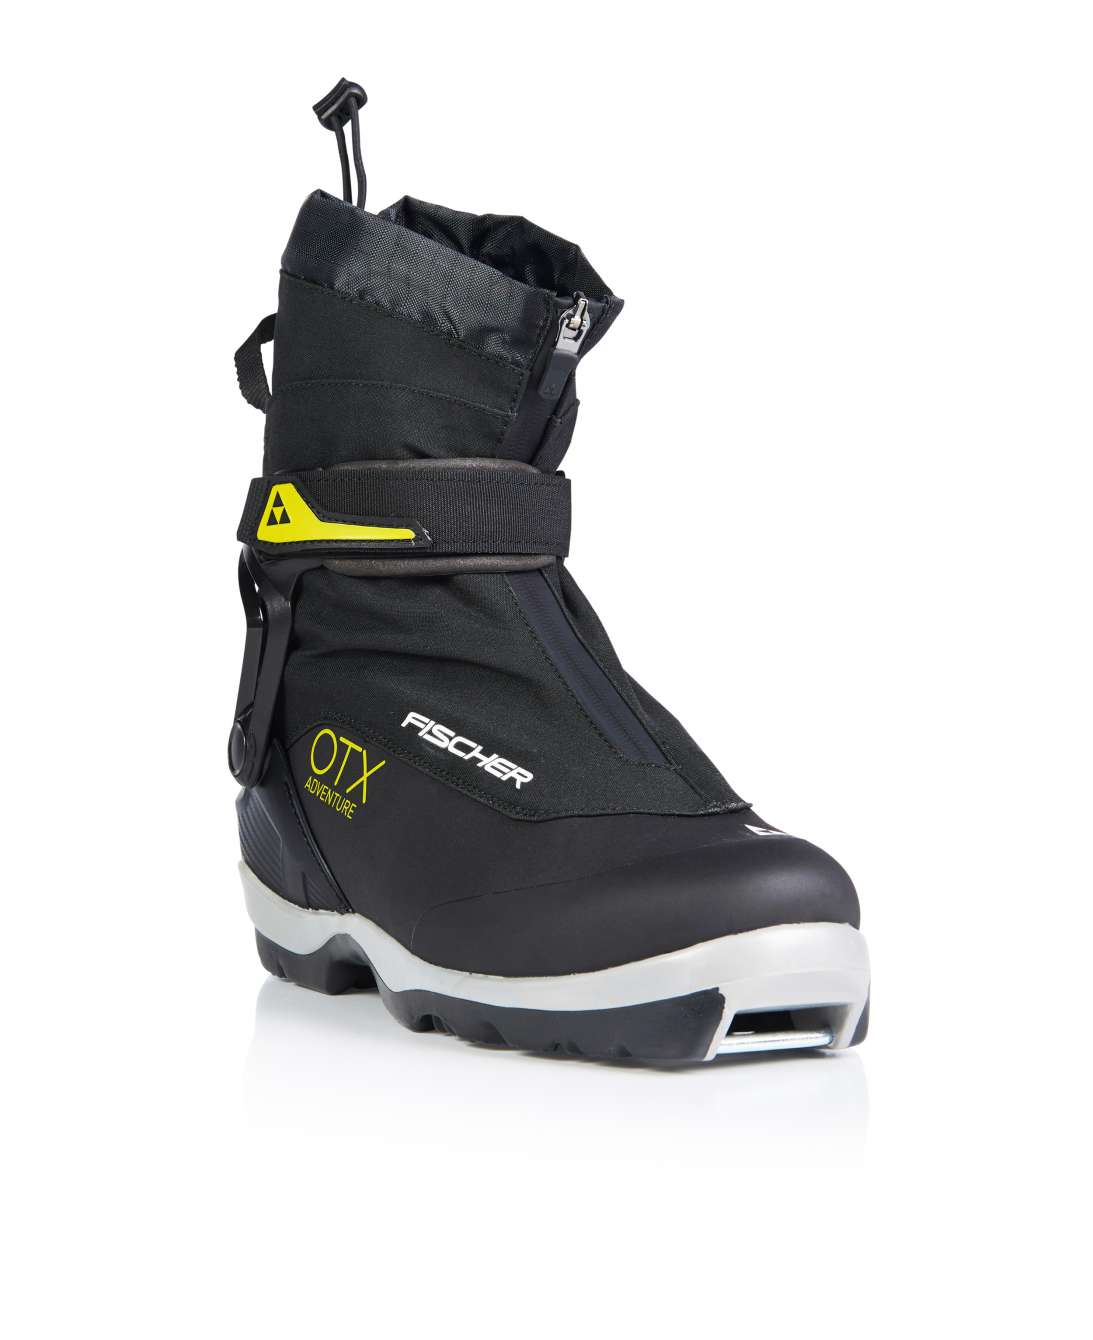 fisher otx boot review